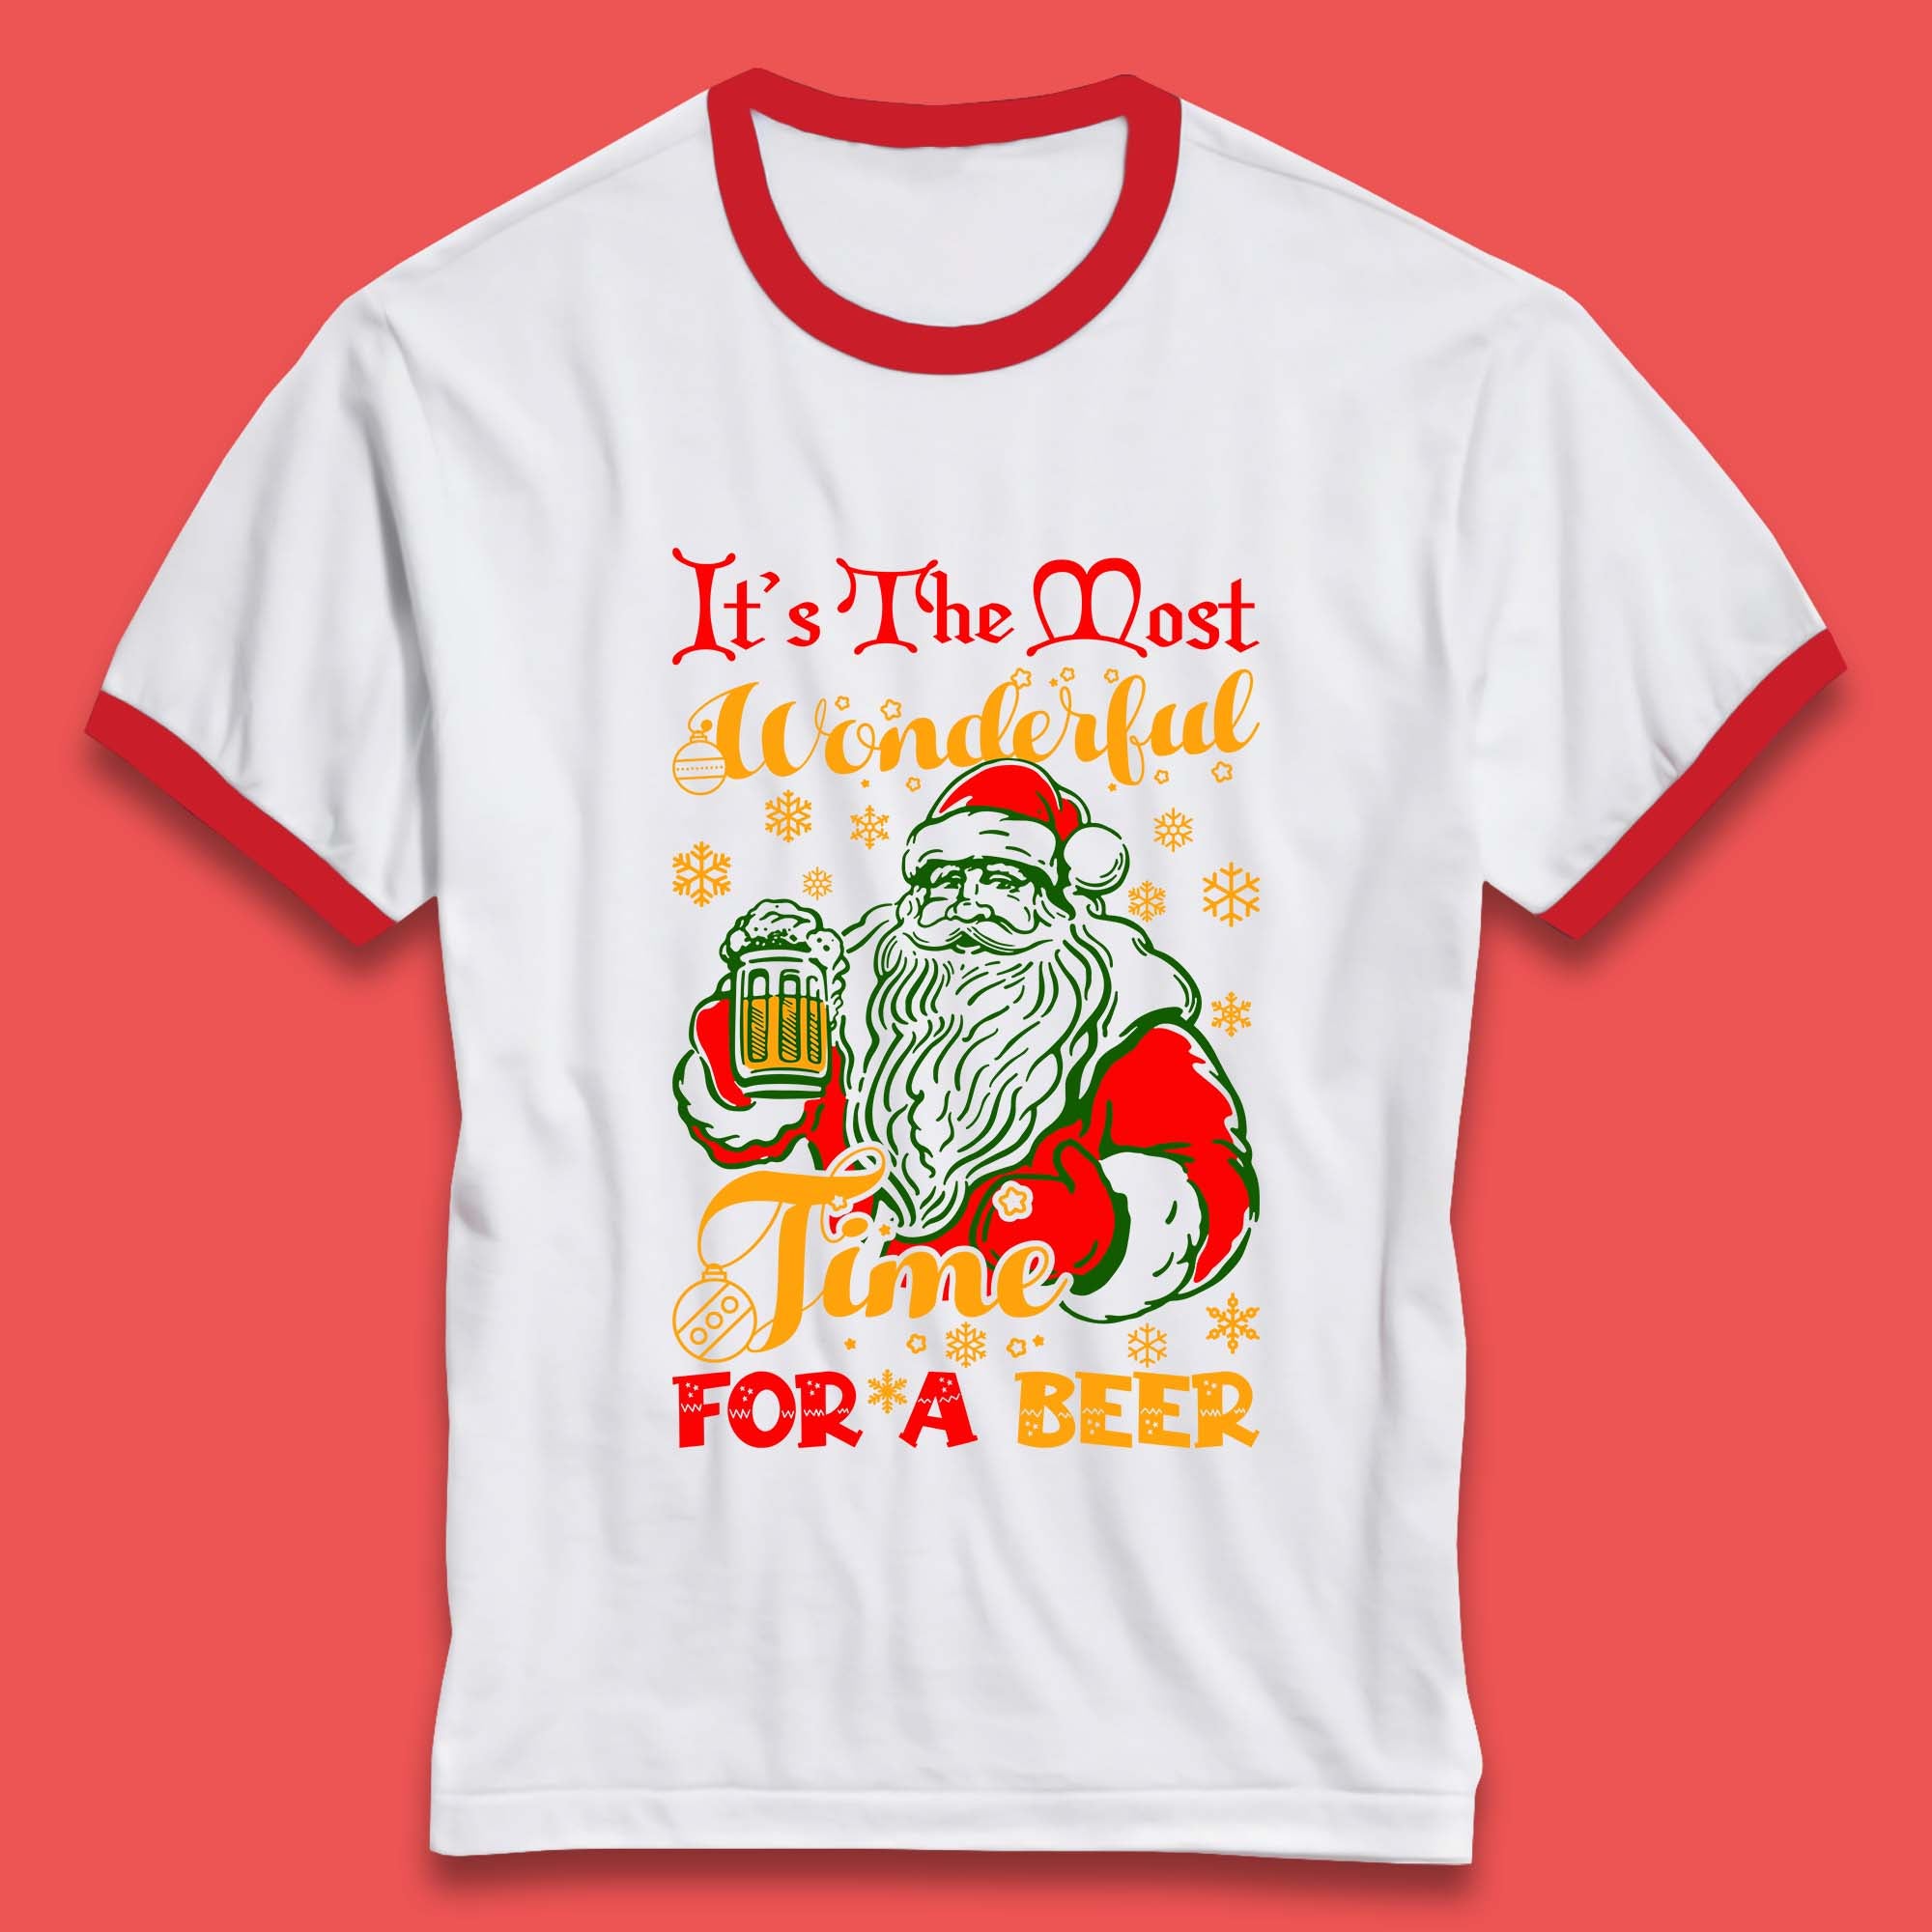 It's The Most Wonderful Time For A Beer Christmas Drinking Party Santa Claus Drink Beer Xmas Ringer T Shirt